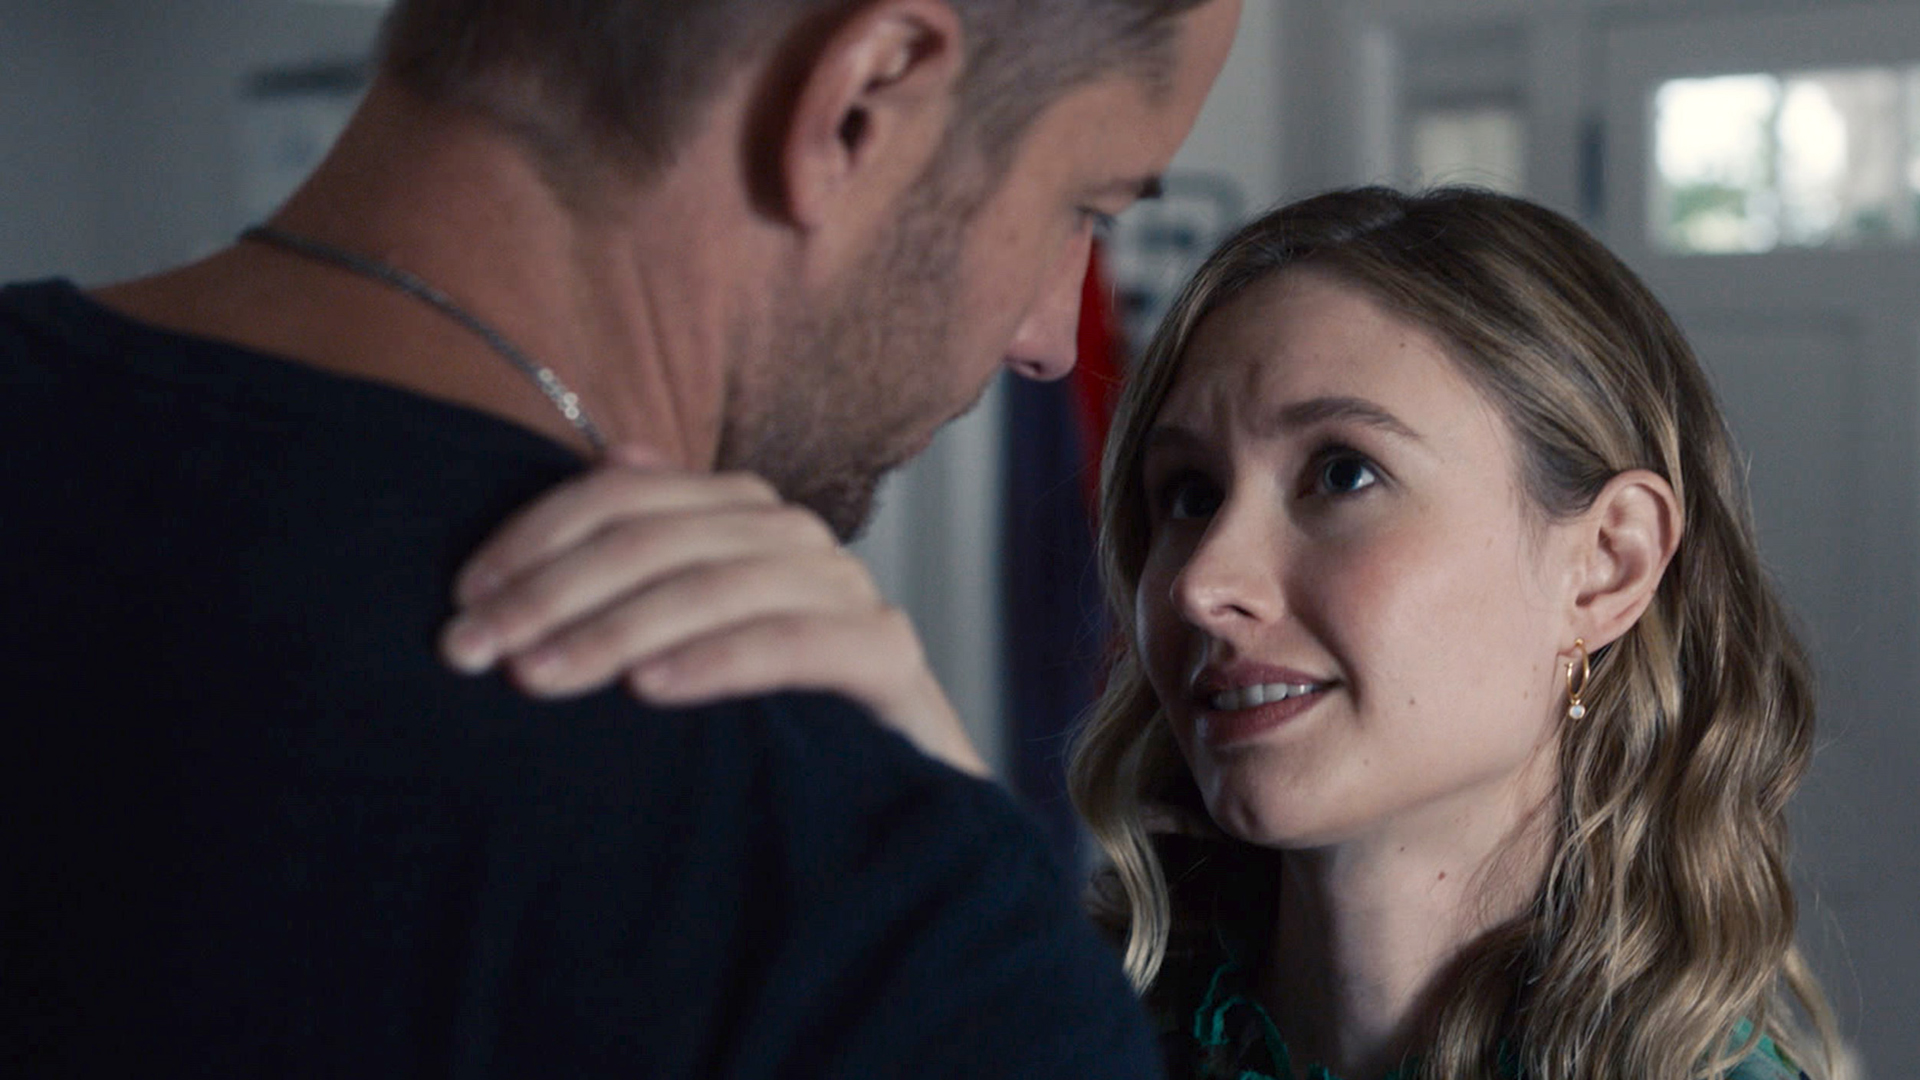 Justin Hartley as Kevin and Caitlin Thompson as Madison on 'This Is Us' Season 5 Episode 5 in 2021